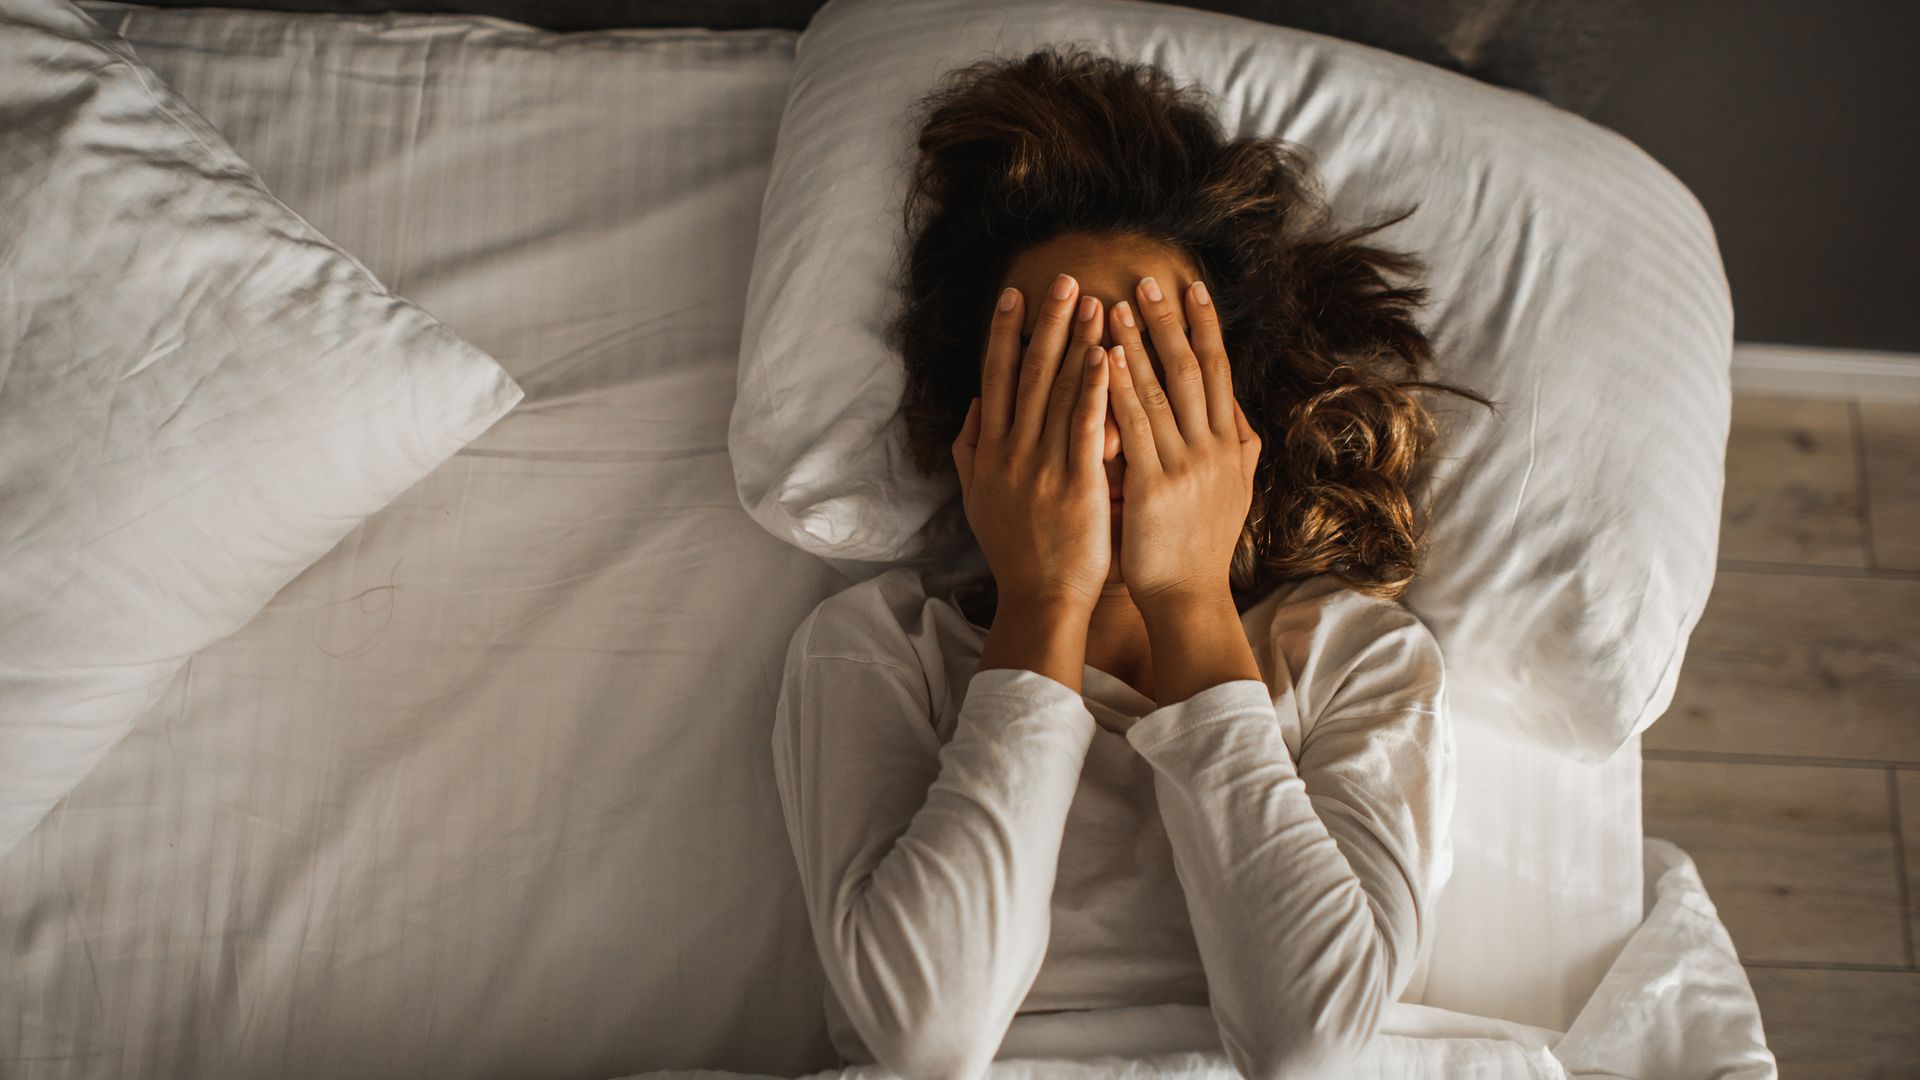 I had crippling perimenopausal insomnia - here's how I cured it